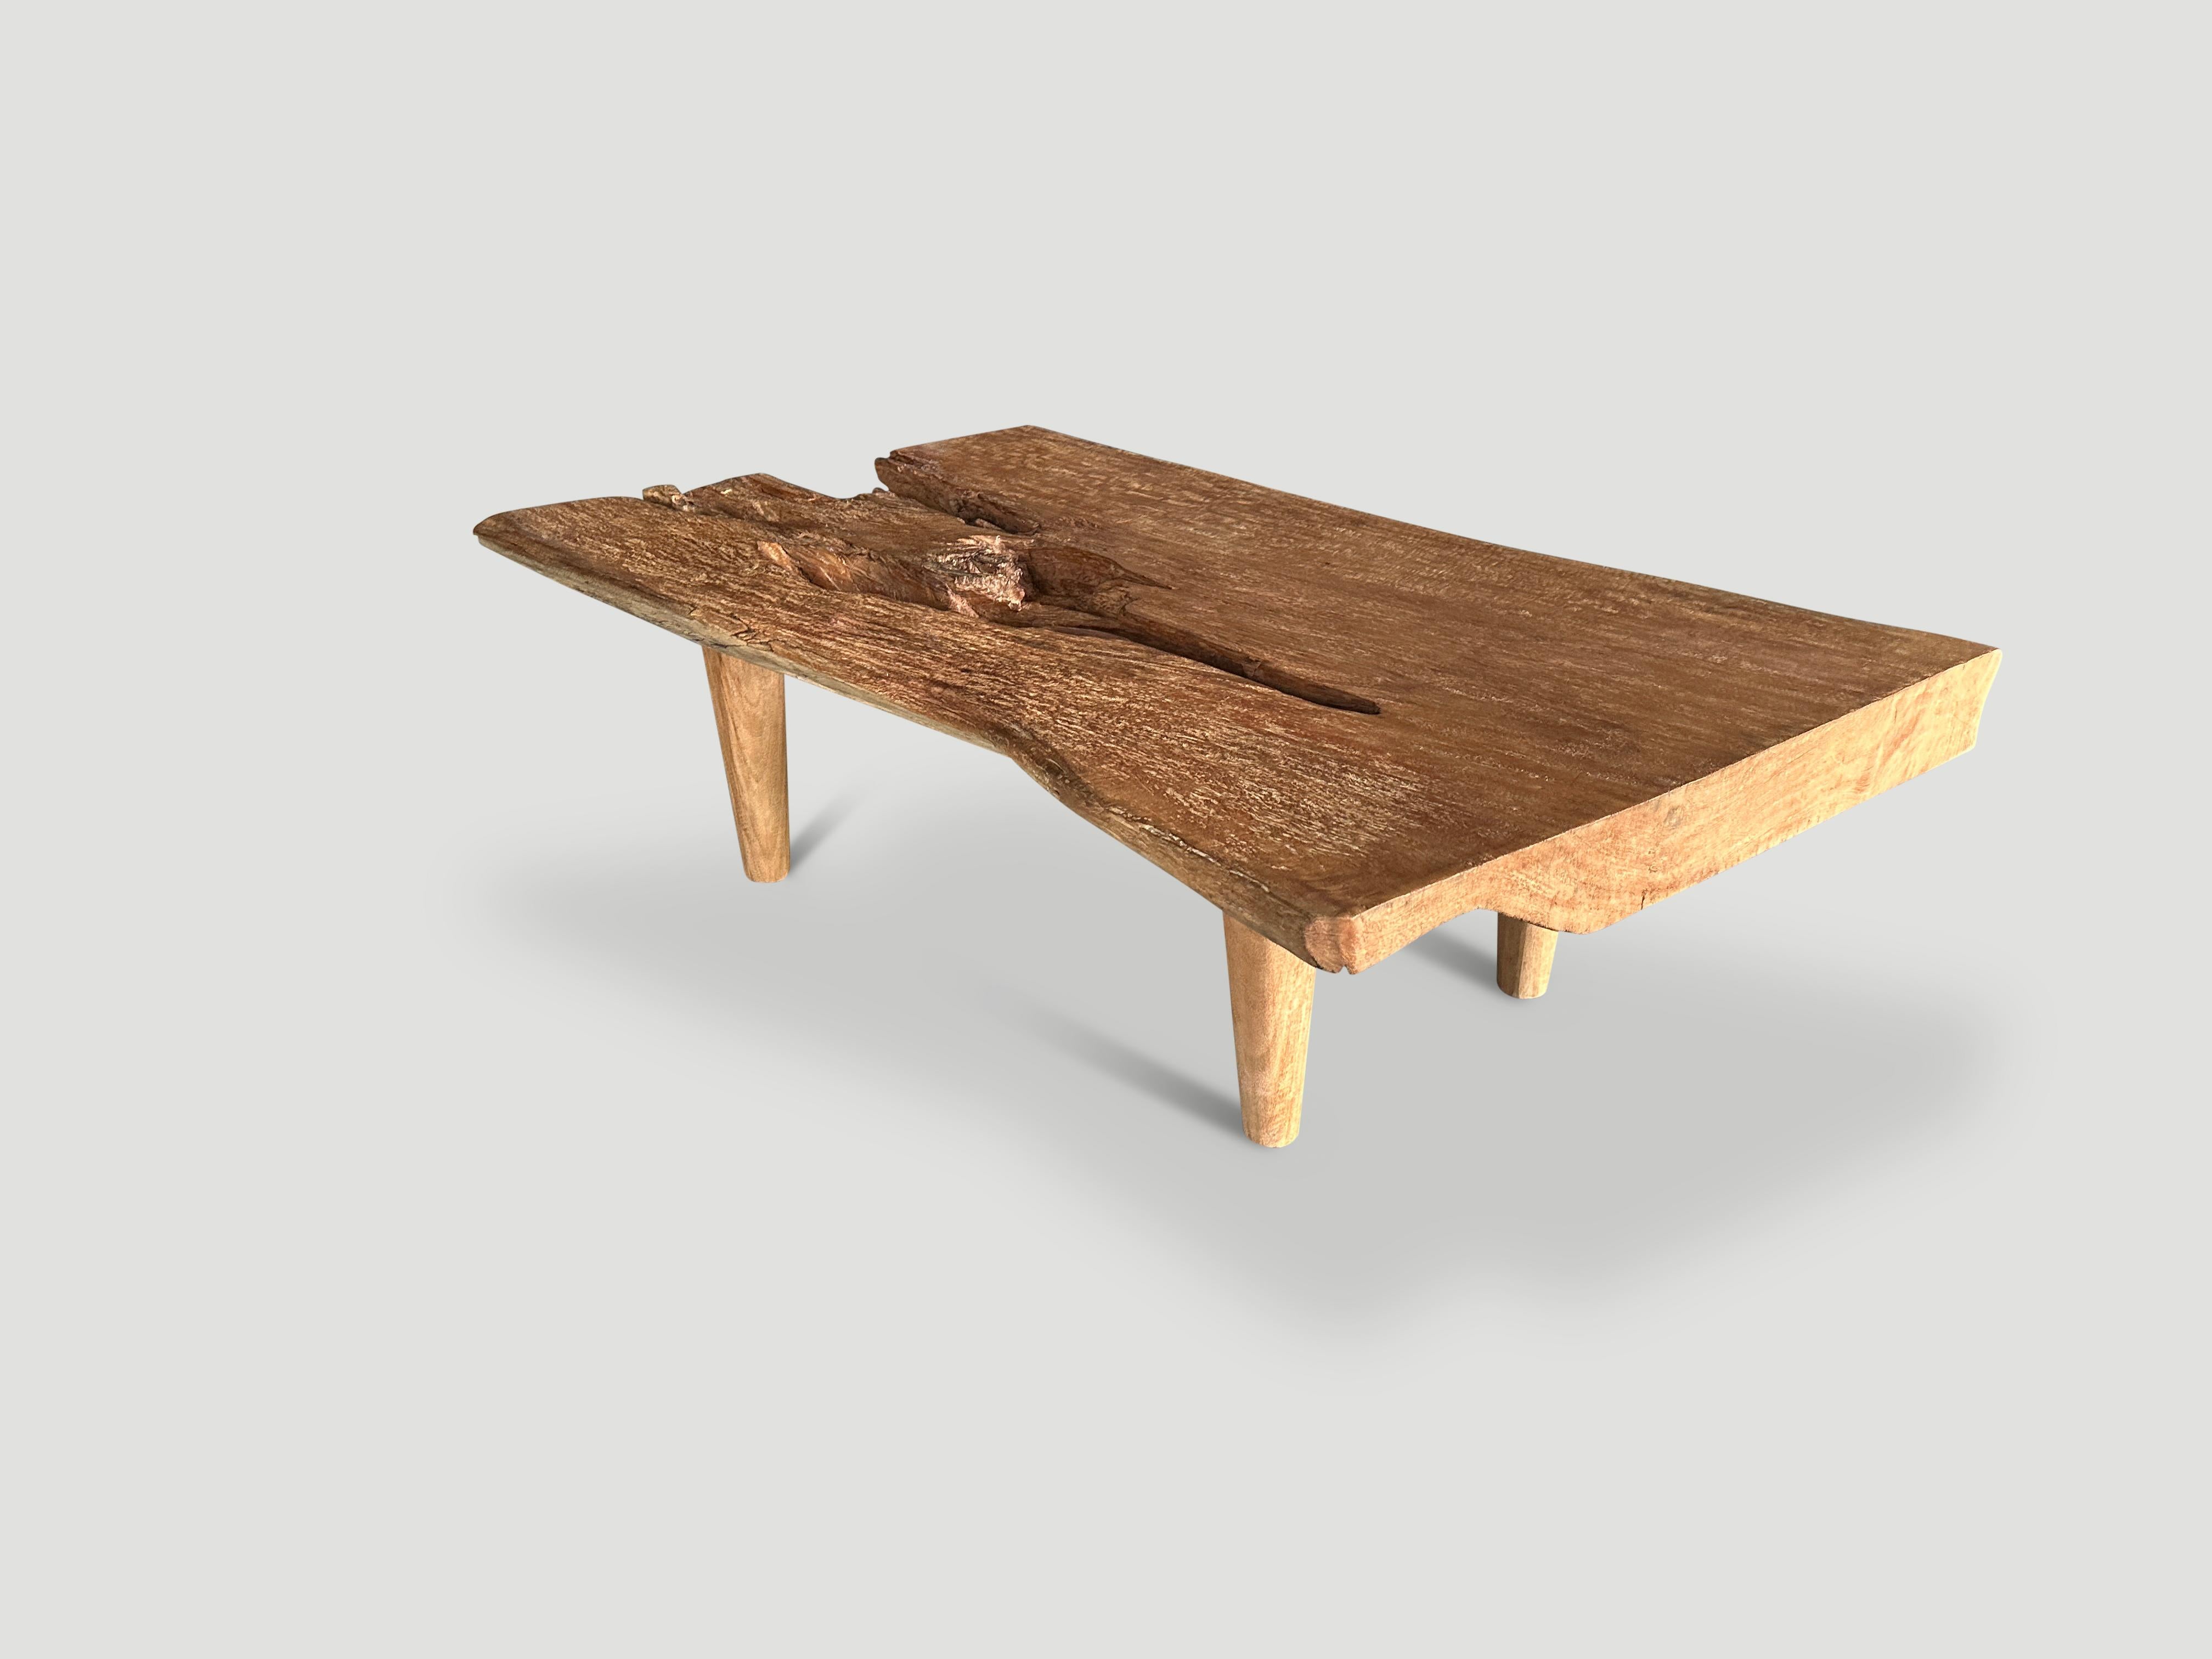 Andrianna Shamaris Organic Single Slab Suar Wood Coffee Table In Excellent Condition For Sale In New York, NY